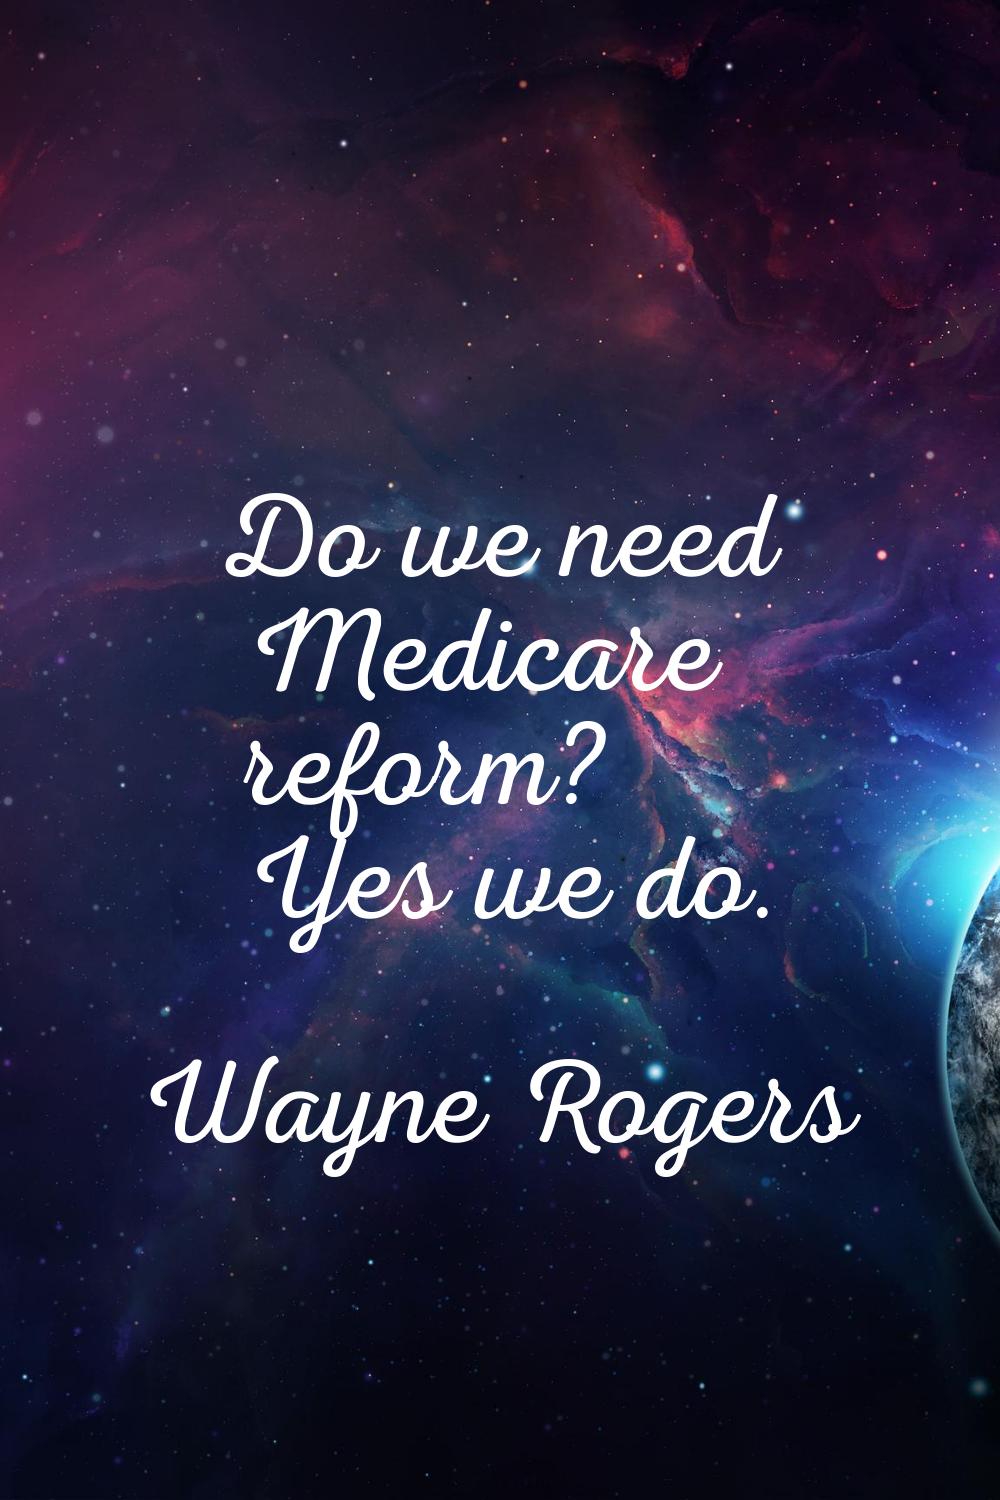 Do we need Medicare reform? Yes we do.